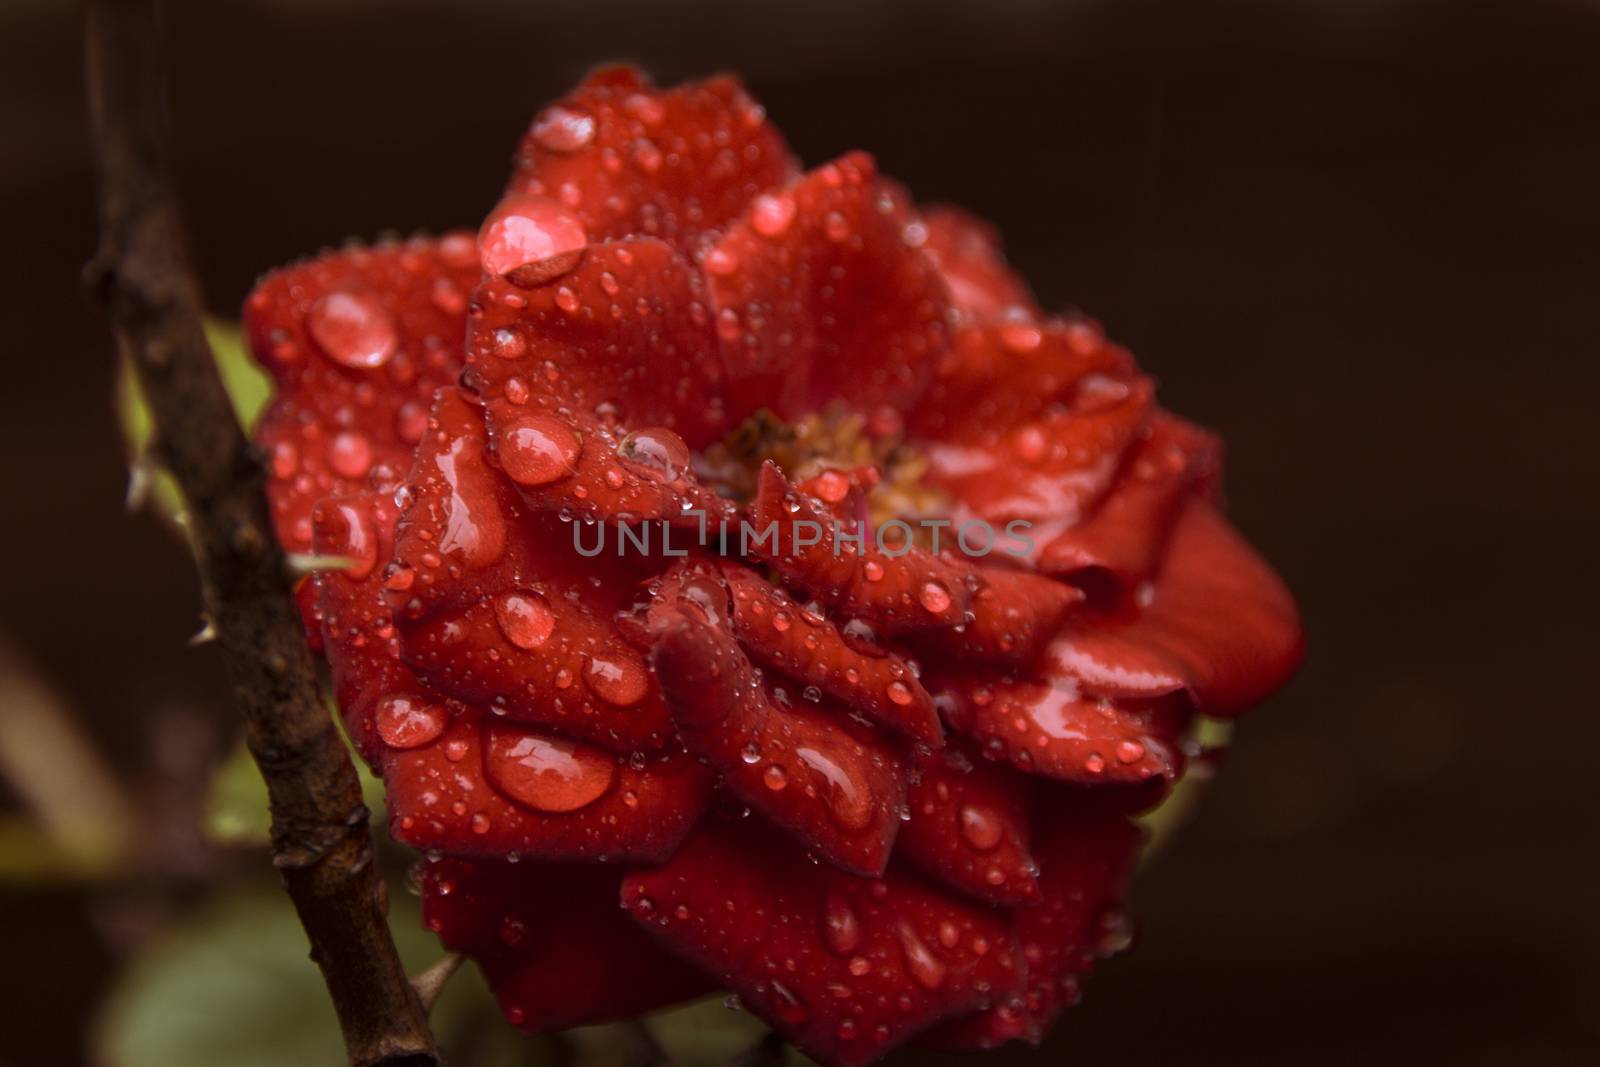 a fresh red rose growing off a thorny stem covered in beads of water droplets